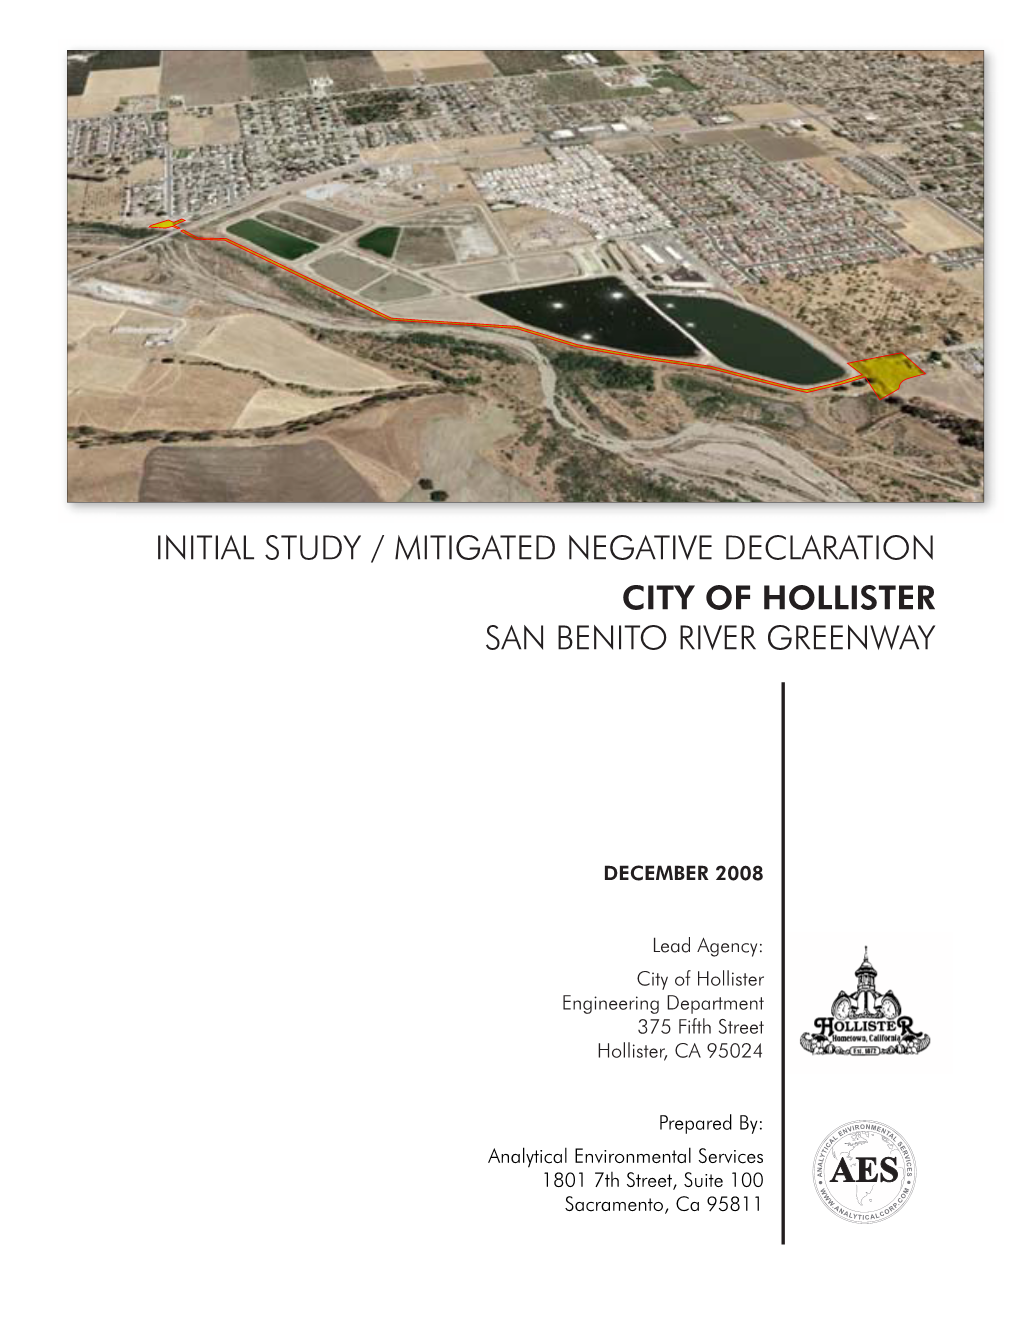 Initial Study / Mitigated Negative Declaration City of Hollister San Benito River Greenway